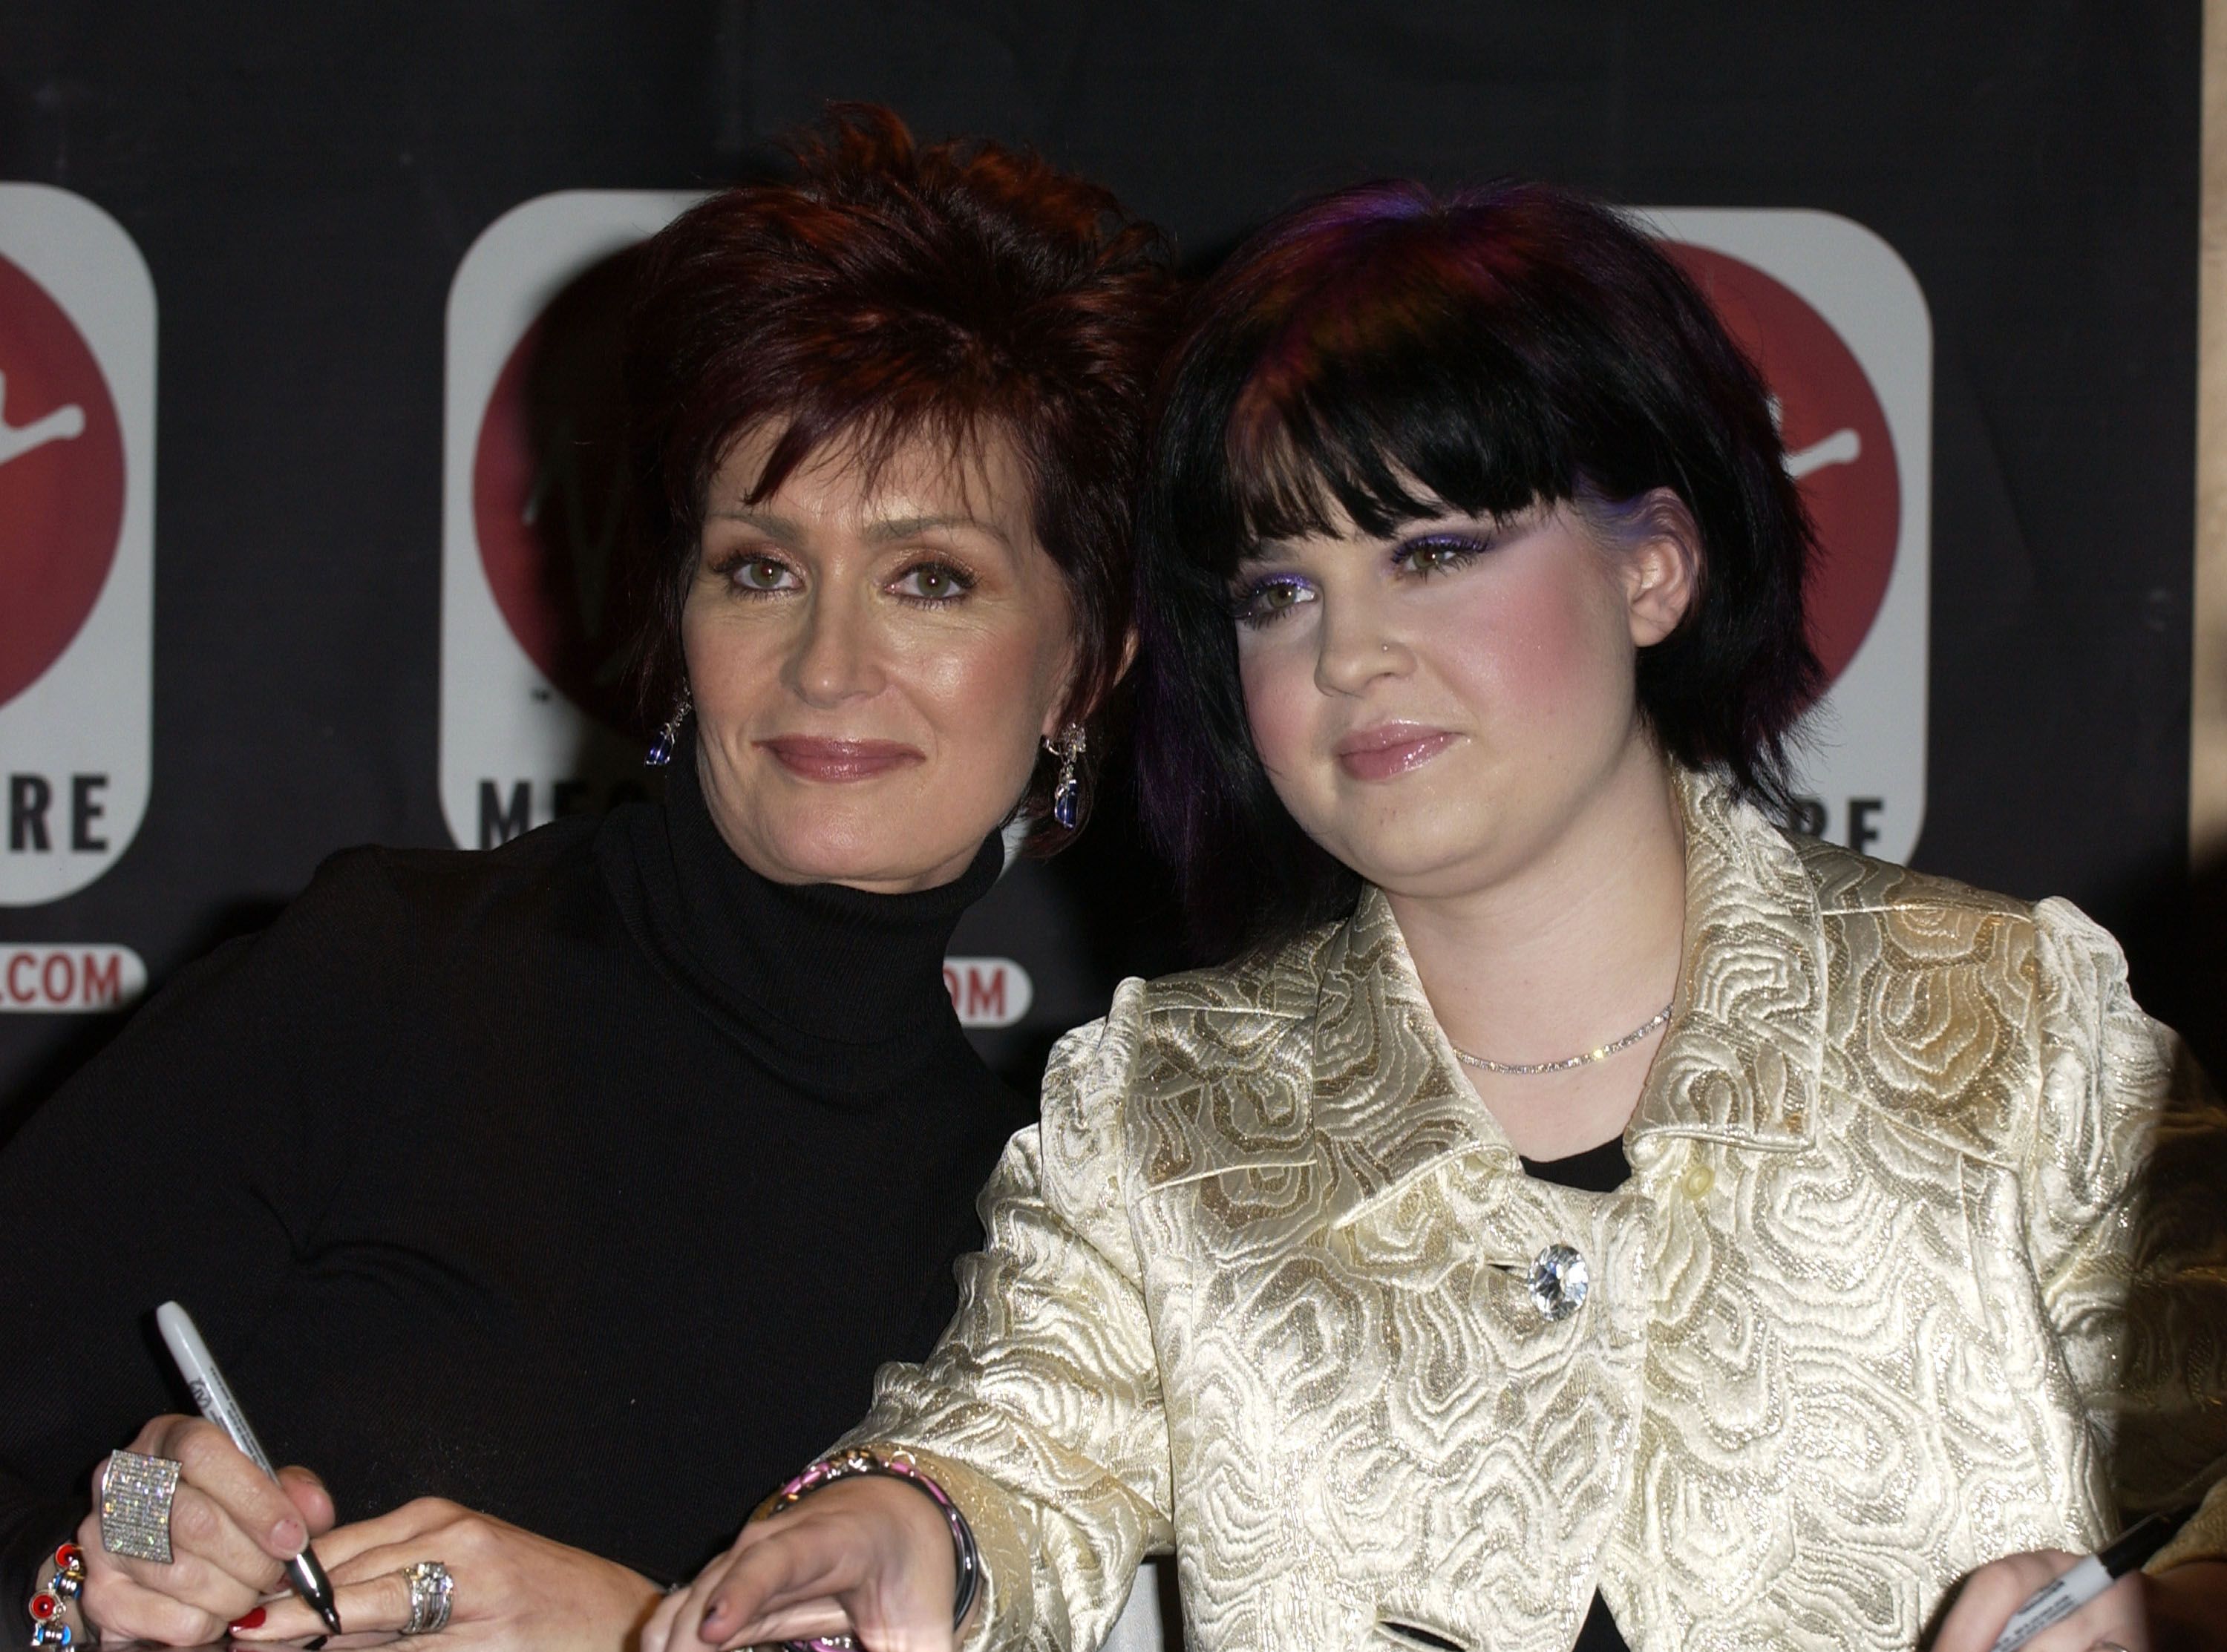 Sharon Osbourne and Kelly Osbourne during the Release of "The Osbournes First Season" DVD at Virgin Megastore in Los Angeles, California. | Source: Getty Images